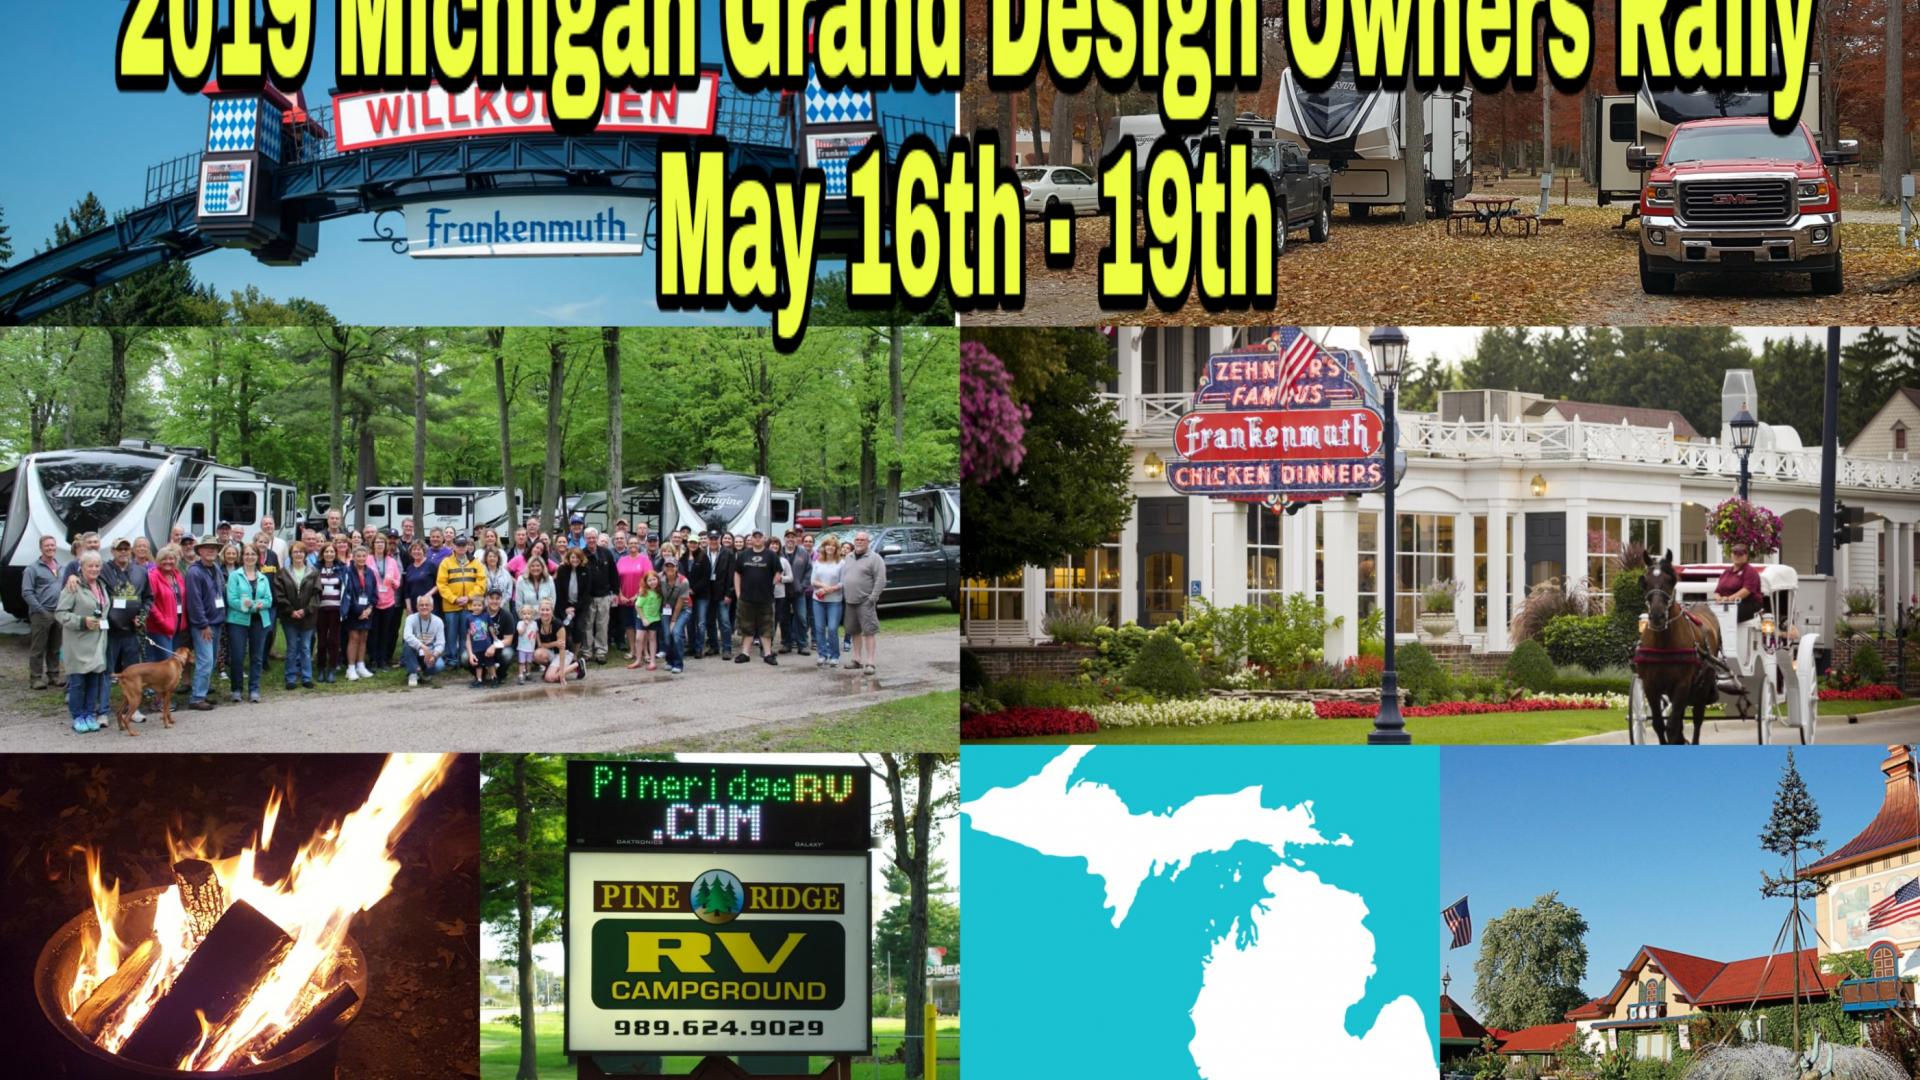 2019 Michigan Grand Design Owner's Rally GDRV4Life Your Connection